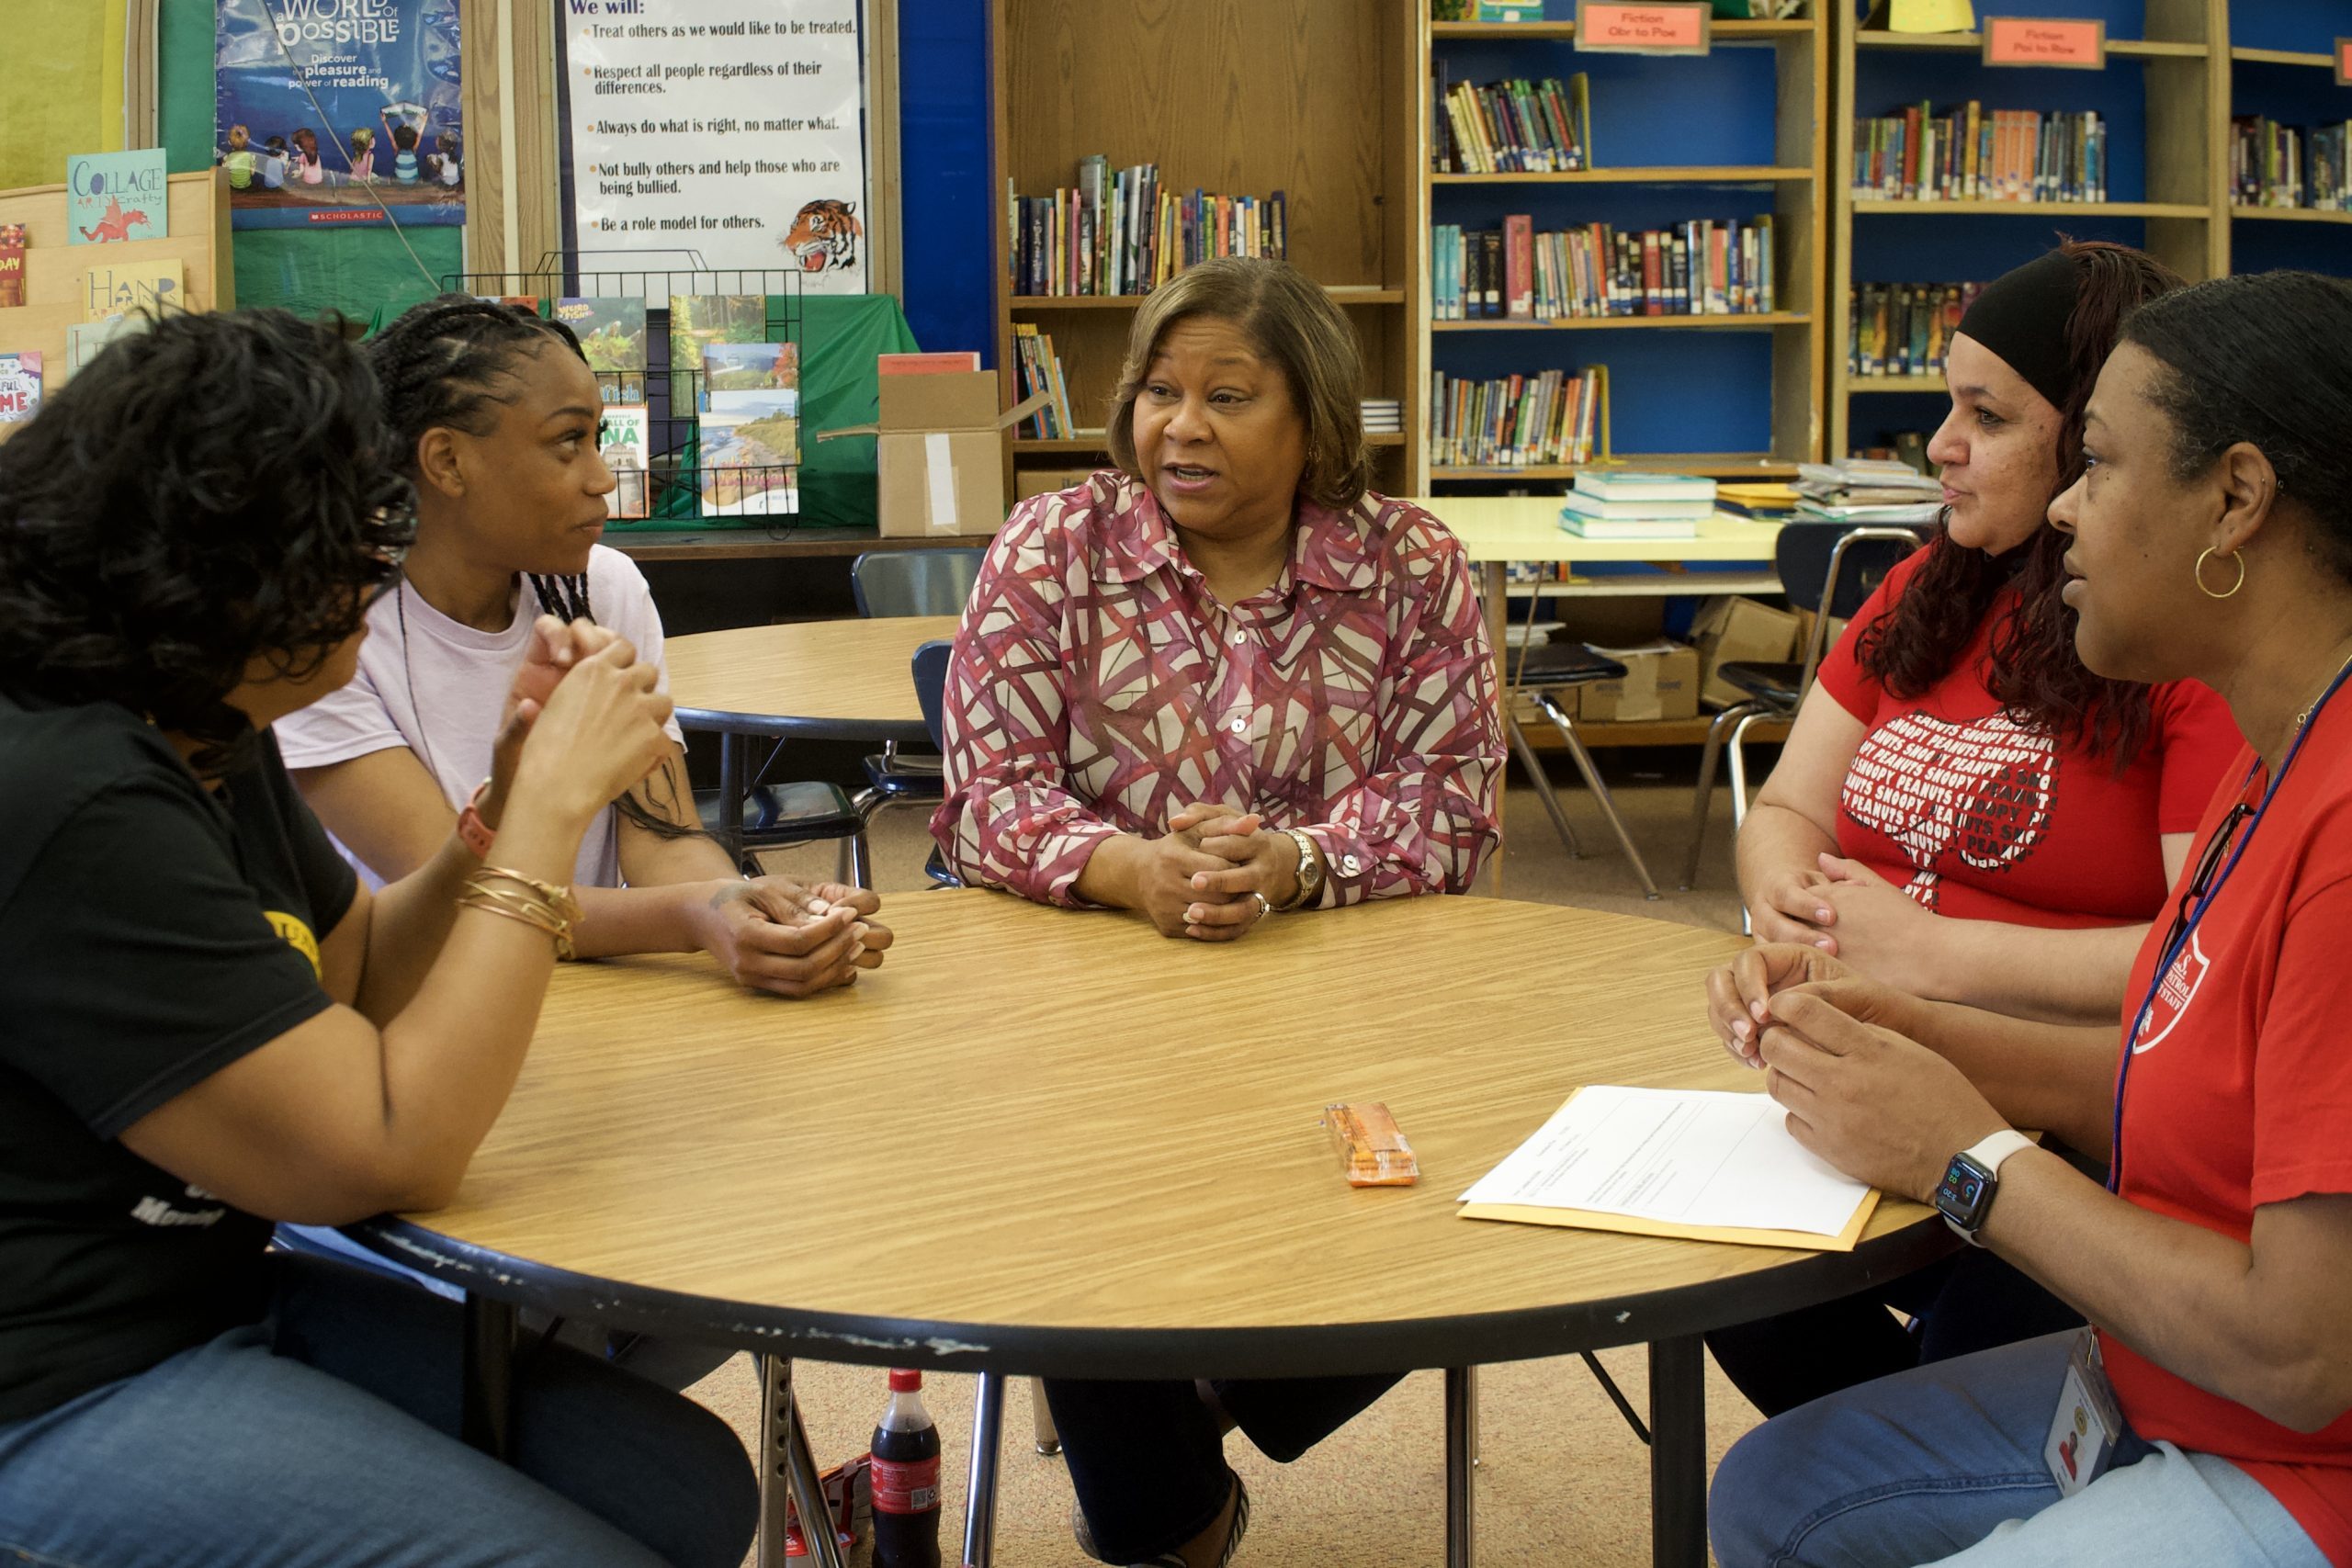 Mary Person sits at a table in a school library, engaged in discussion with four young adults.